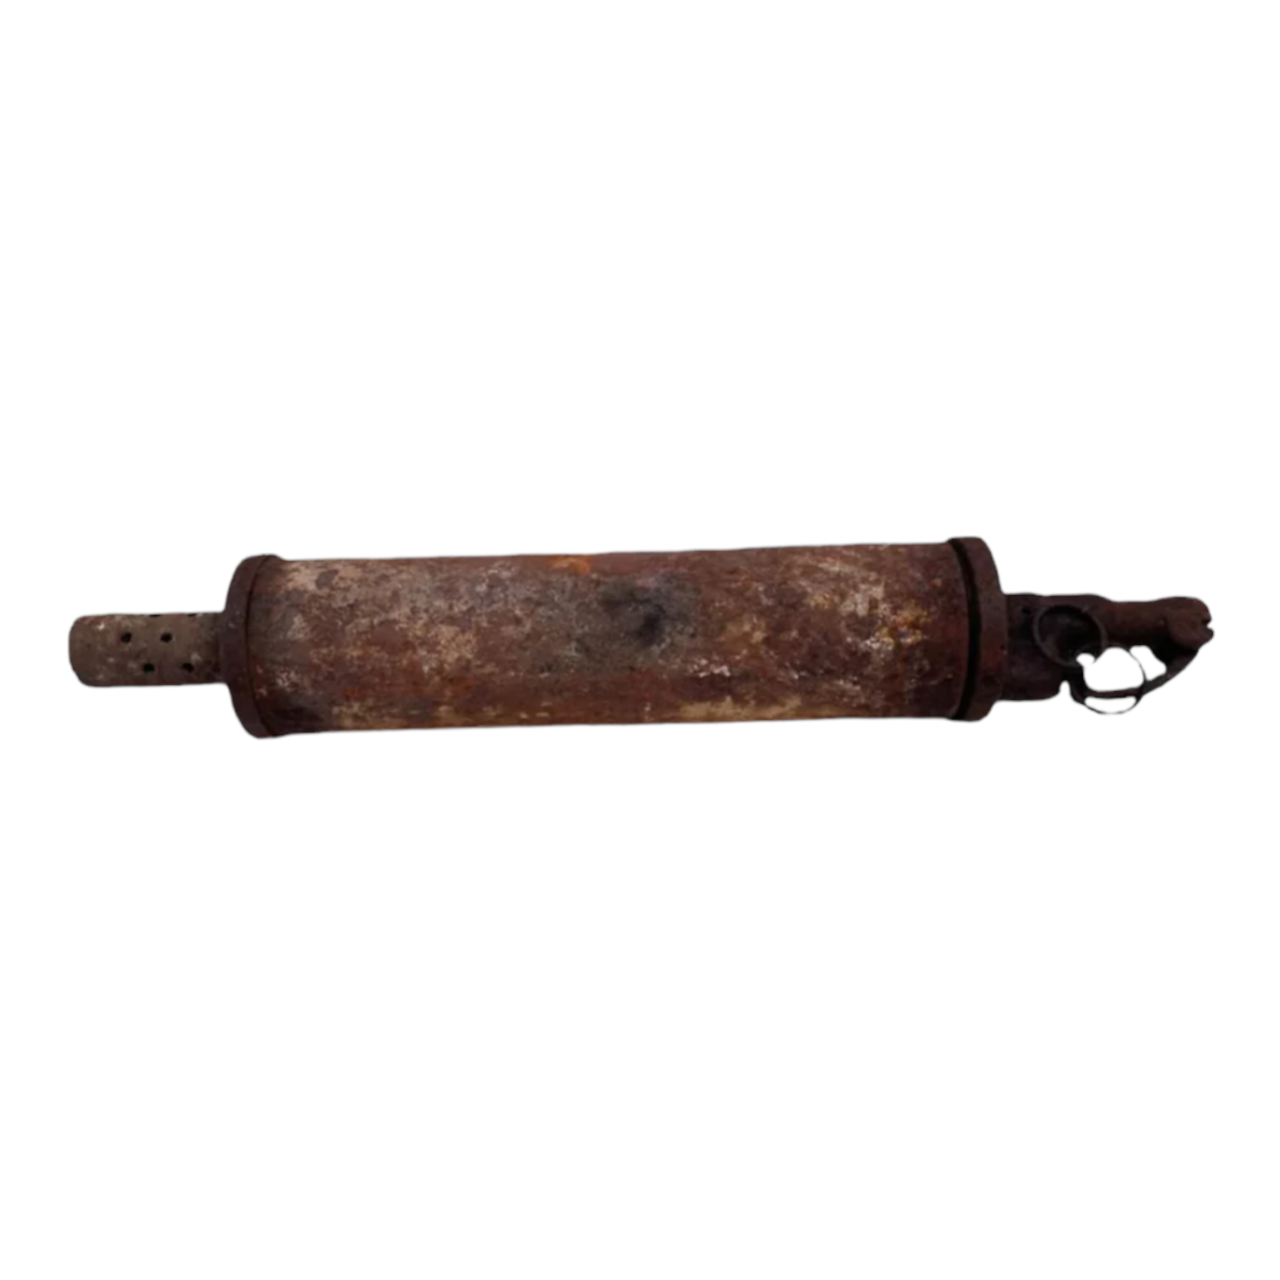 WW1 British stokes mortar round sold by All Things French Store